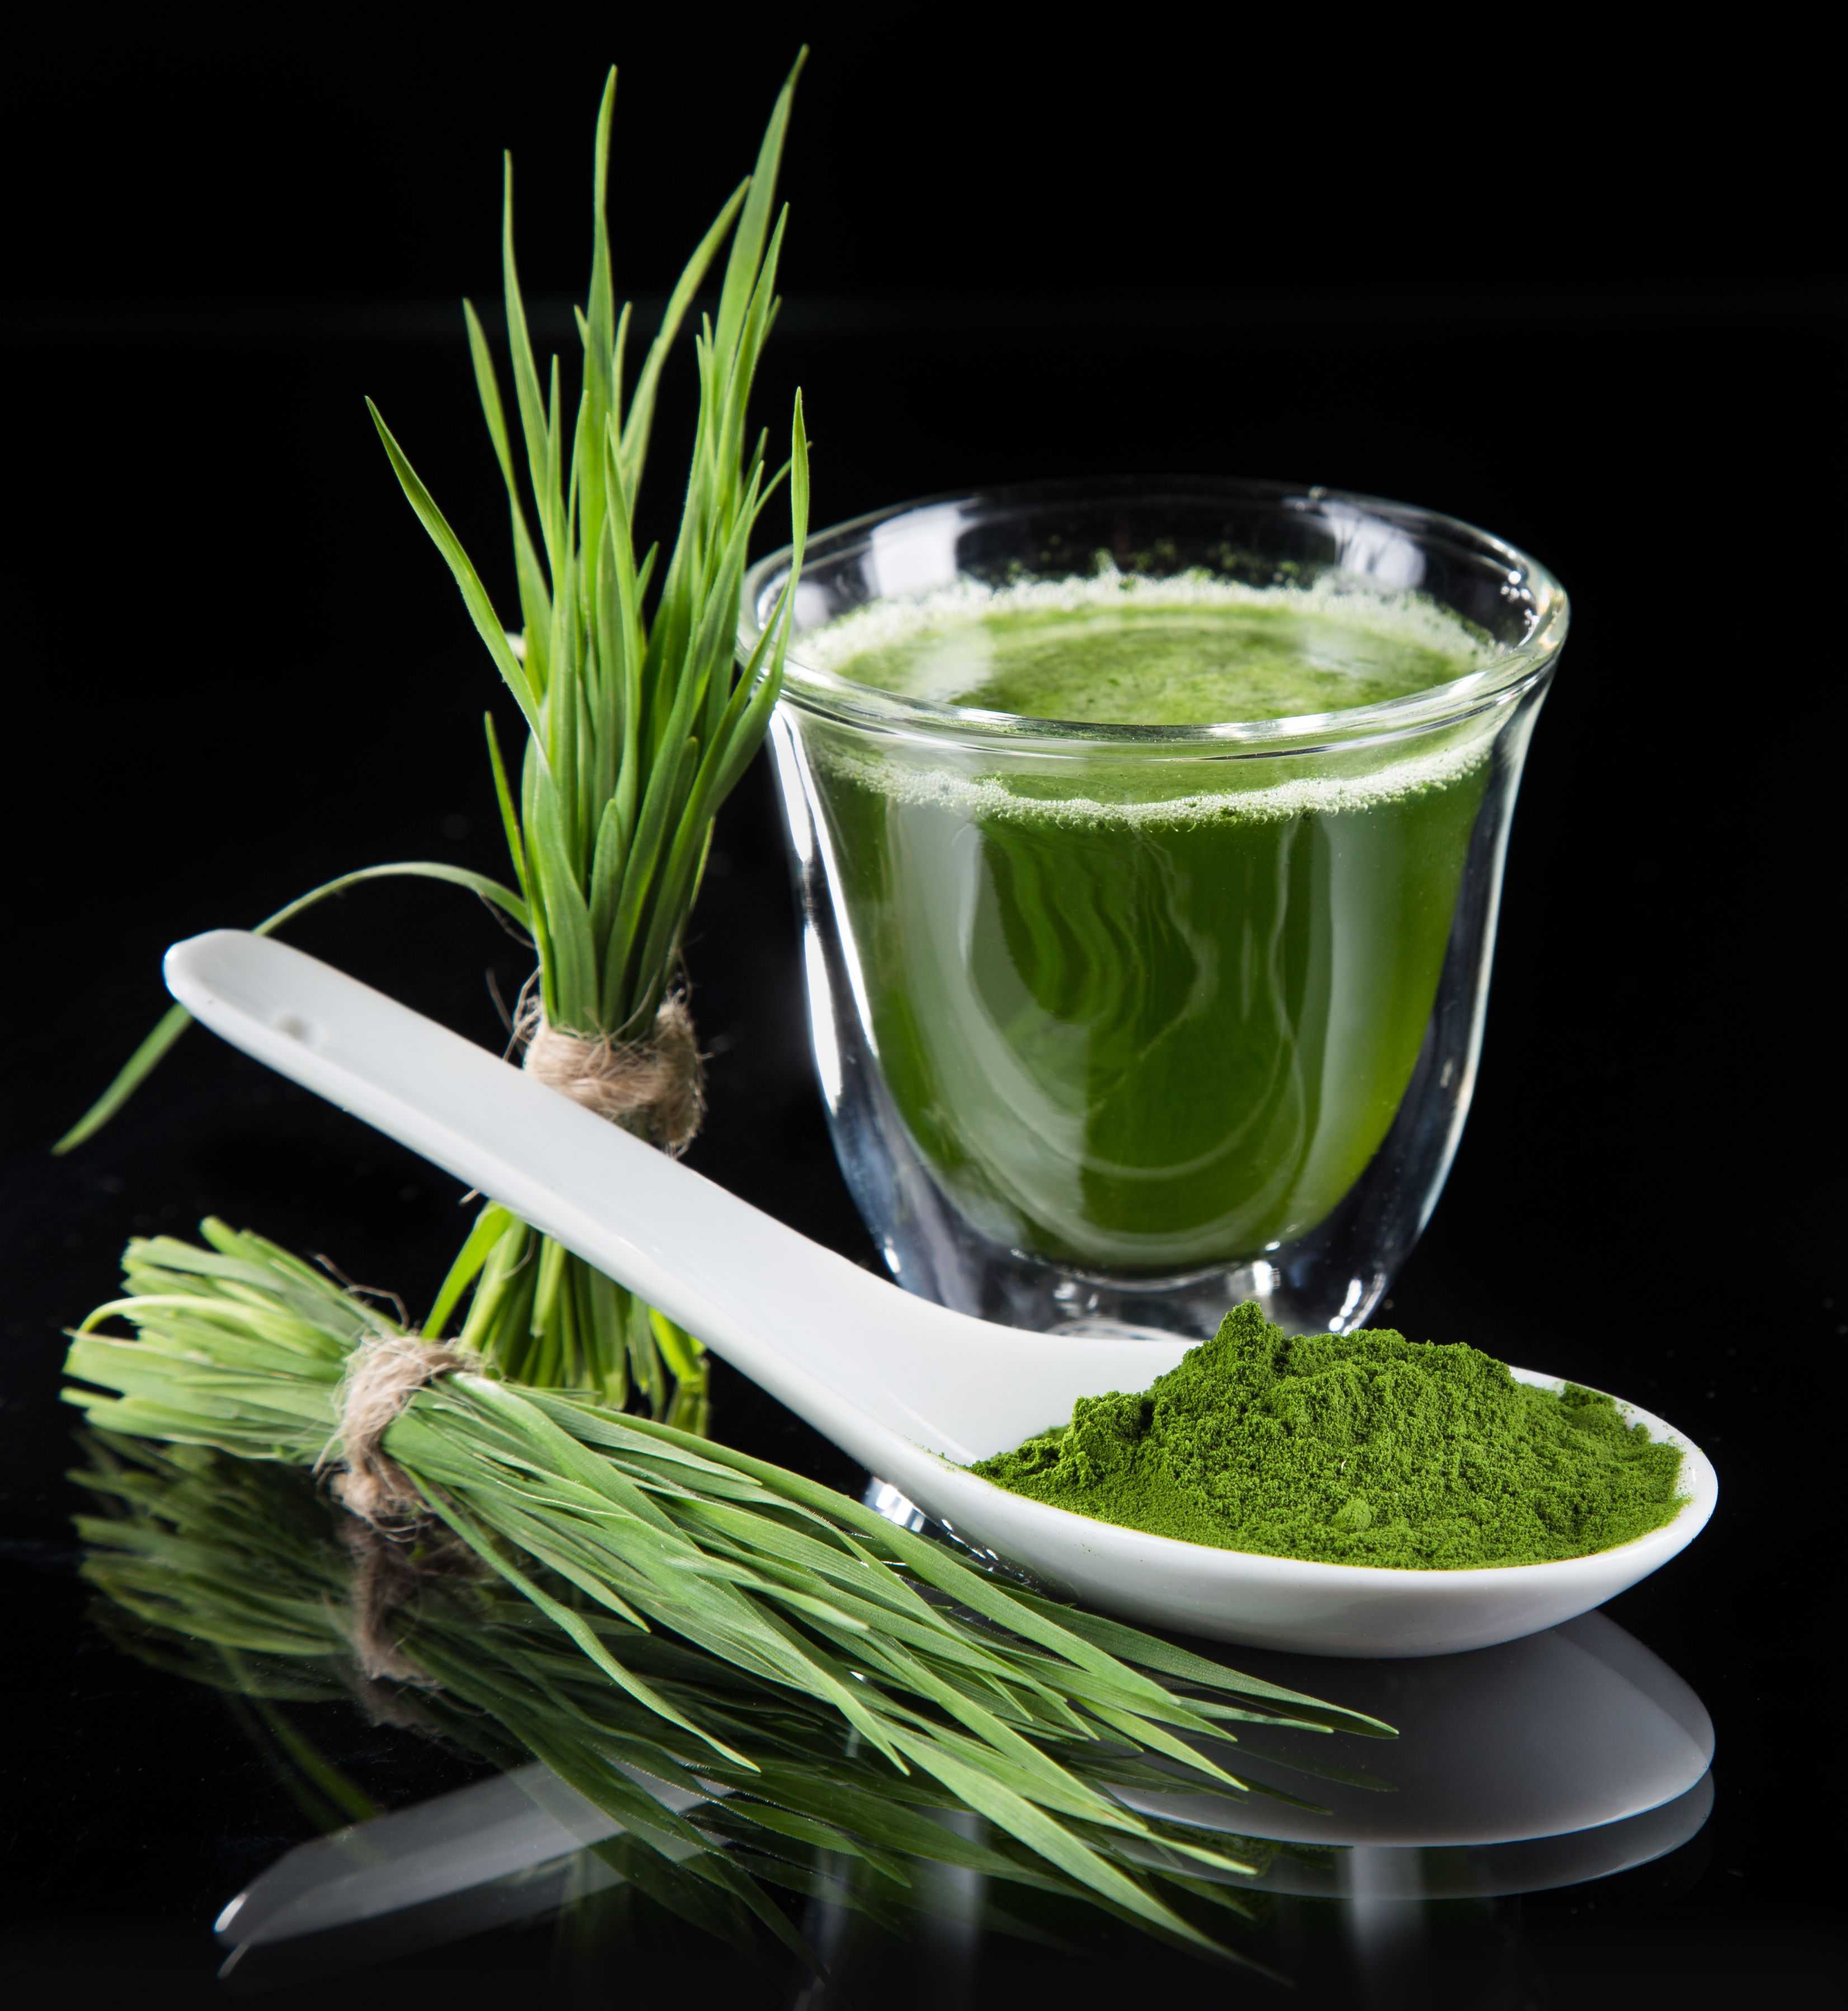 Spirulina Certainly Earns its Superfood Status